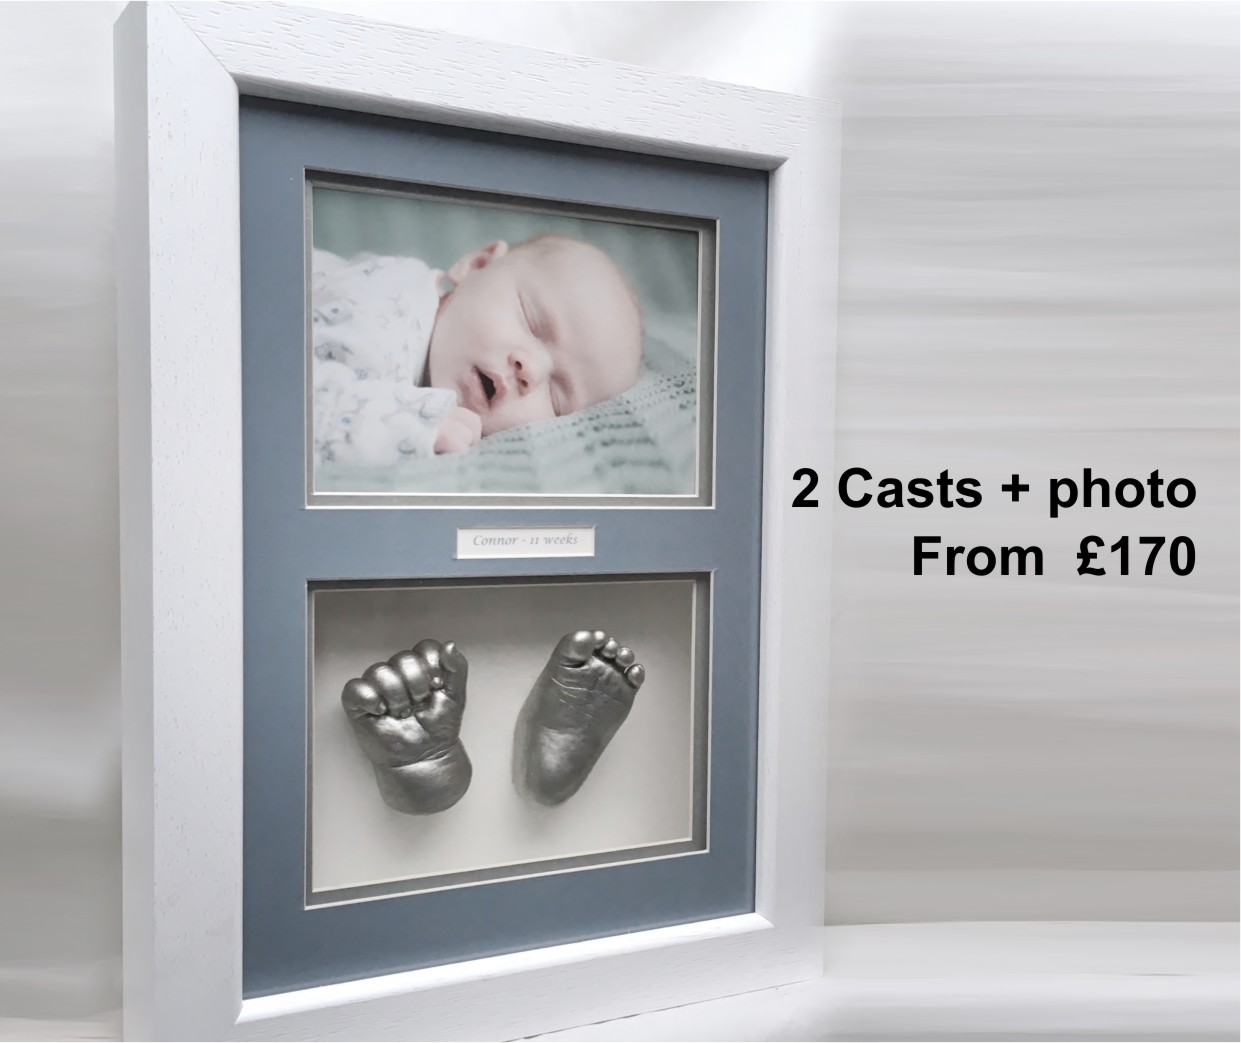 Babyprints price guide